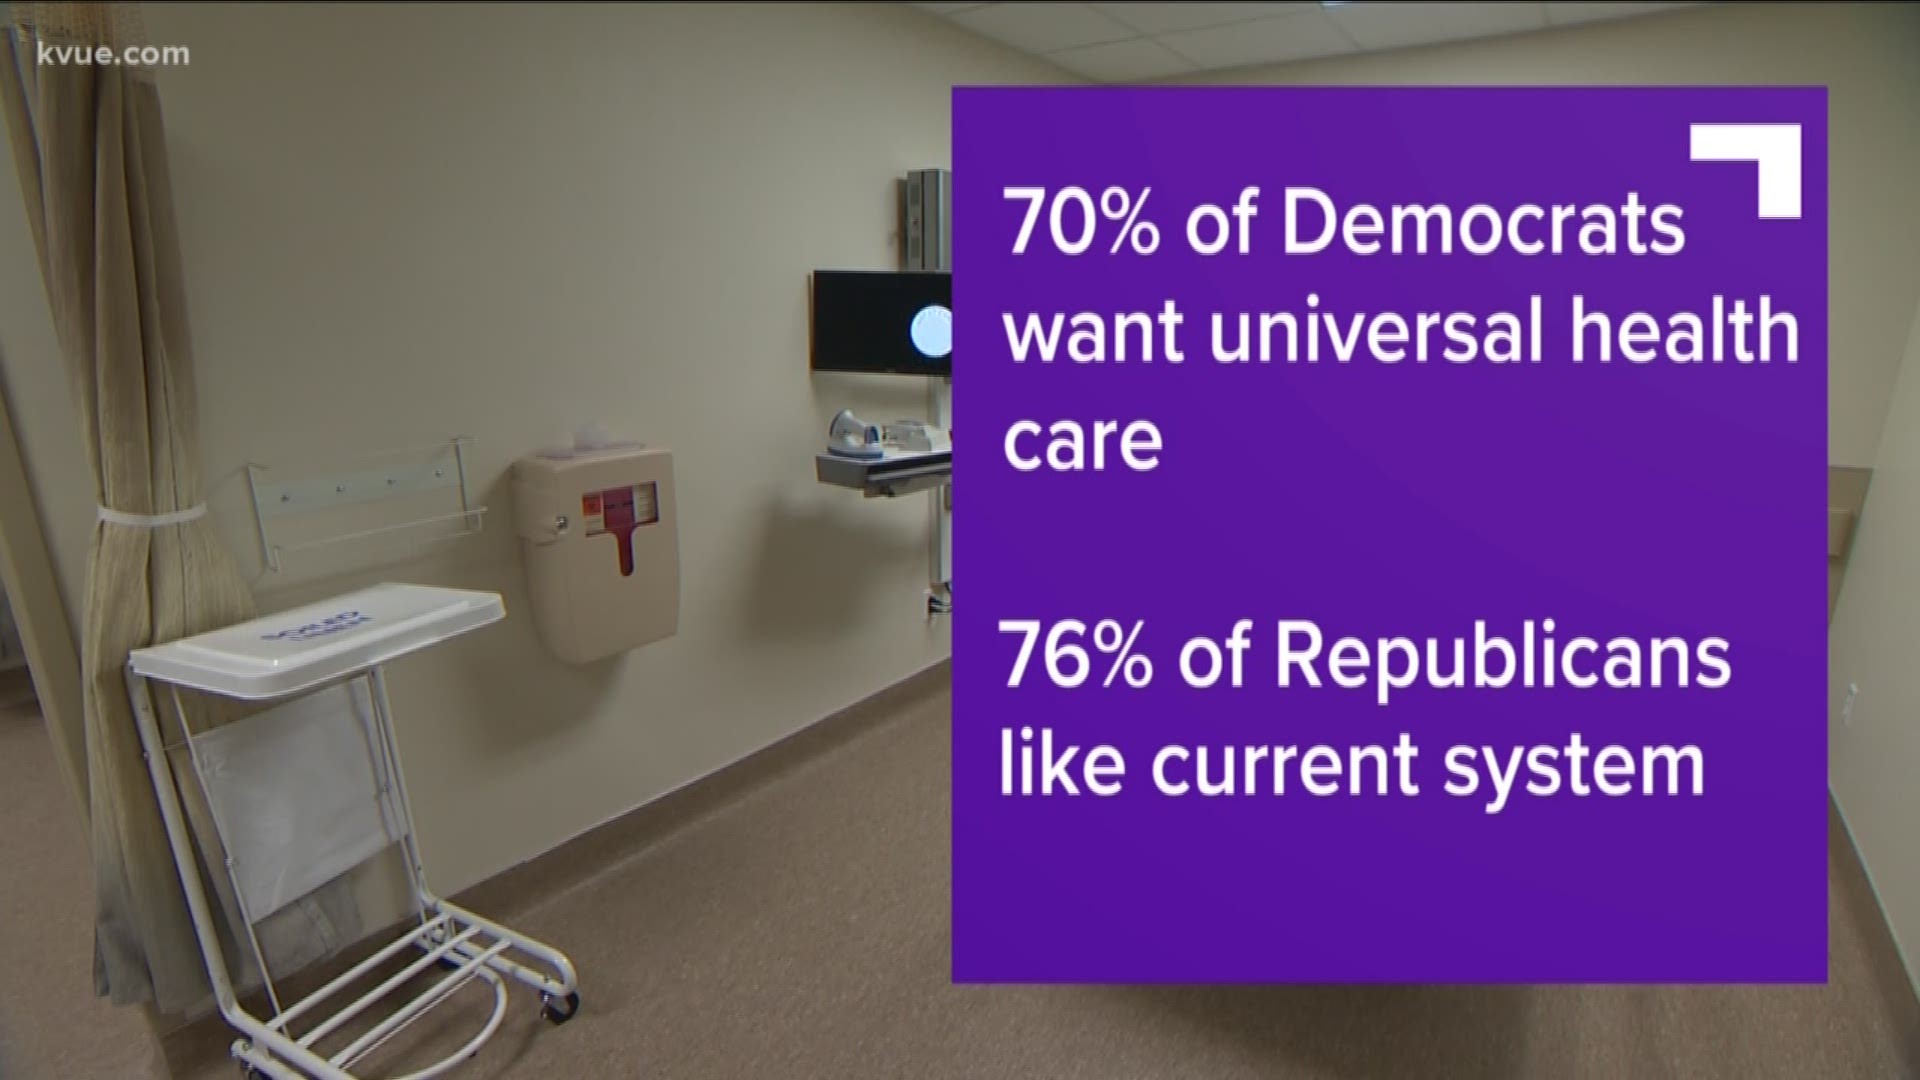 Texas voters care most about health care and immigration, according to a new poll by the University of Texas and the Texas Tribune.